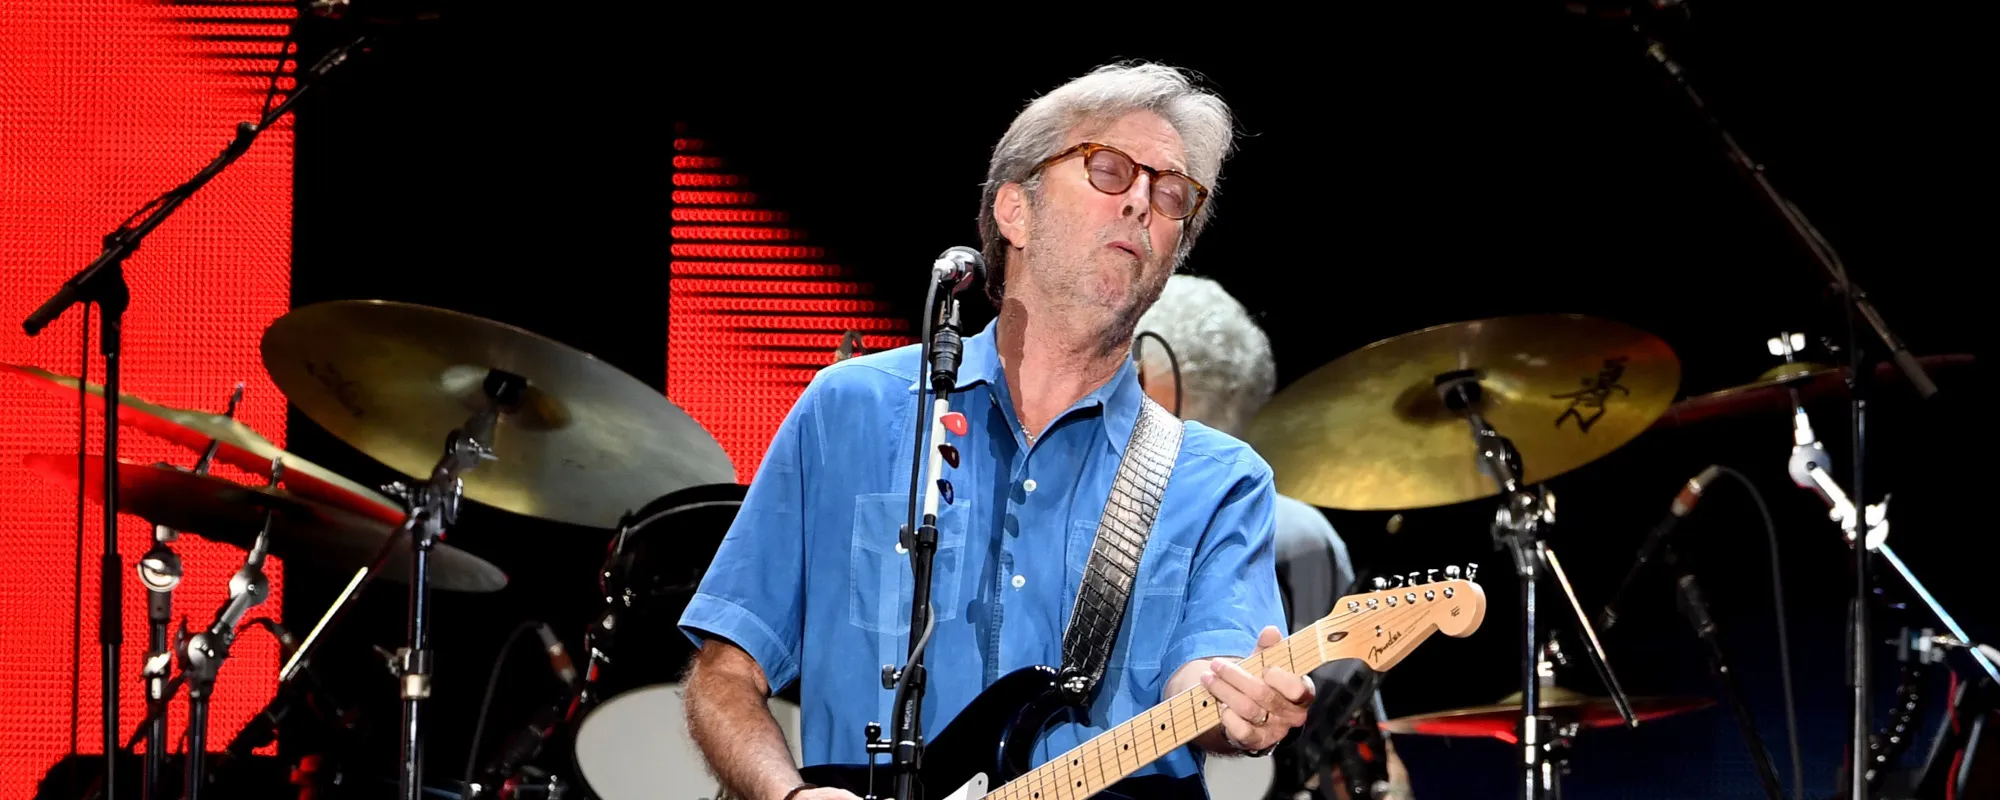 Eric Clapton Launches Major Guitar Auction to Benefit His Crossroads Centre Rehab Facility